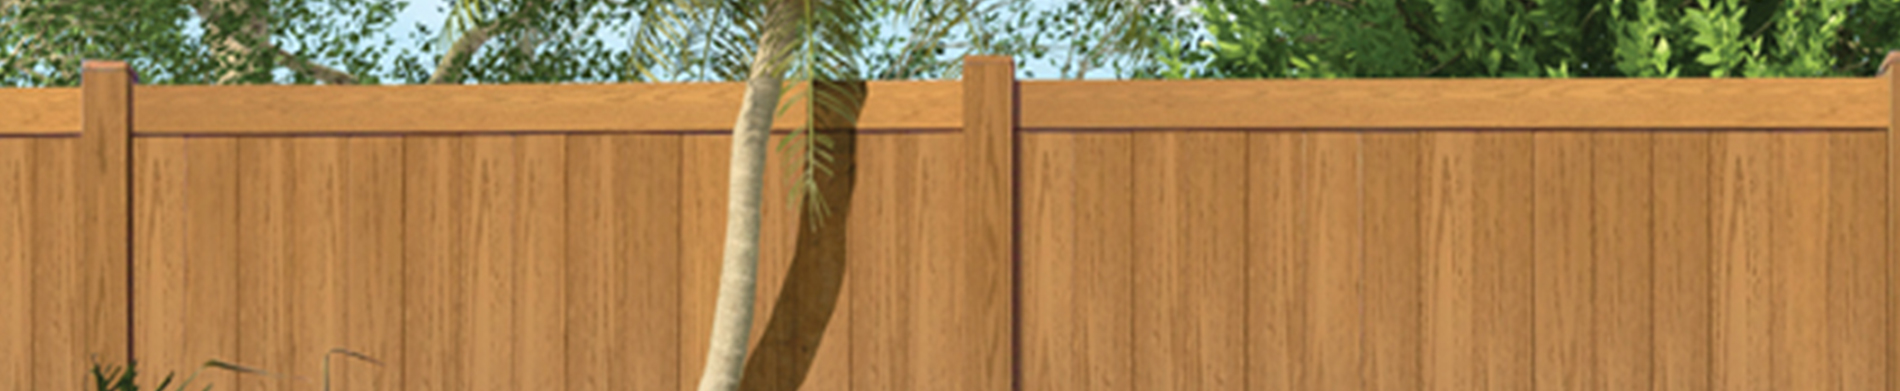 Install a Beautiful Vinyl Privacy Fence to Your Residential Property